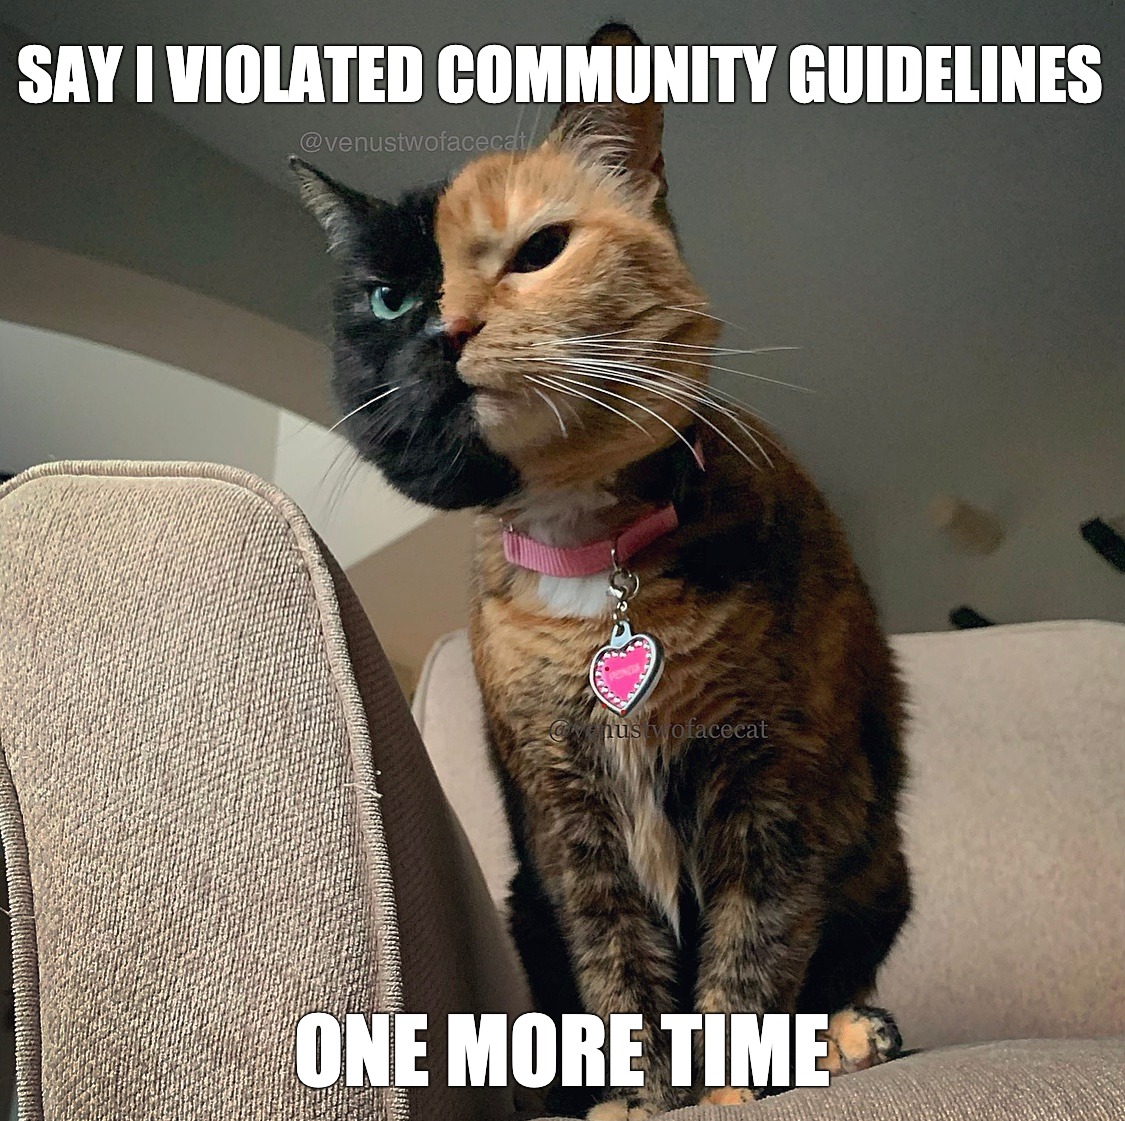 Community Guideline glitches got me like | SAY I VIOLATED COMMUNITY GUIDELINES; ONE MORE TIME | image tagged in instagram,angry cat,triggered,cat,two face,grumpy cat not amused | made w/ Imgflip meme maker